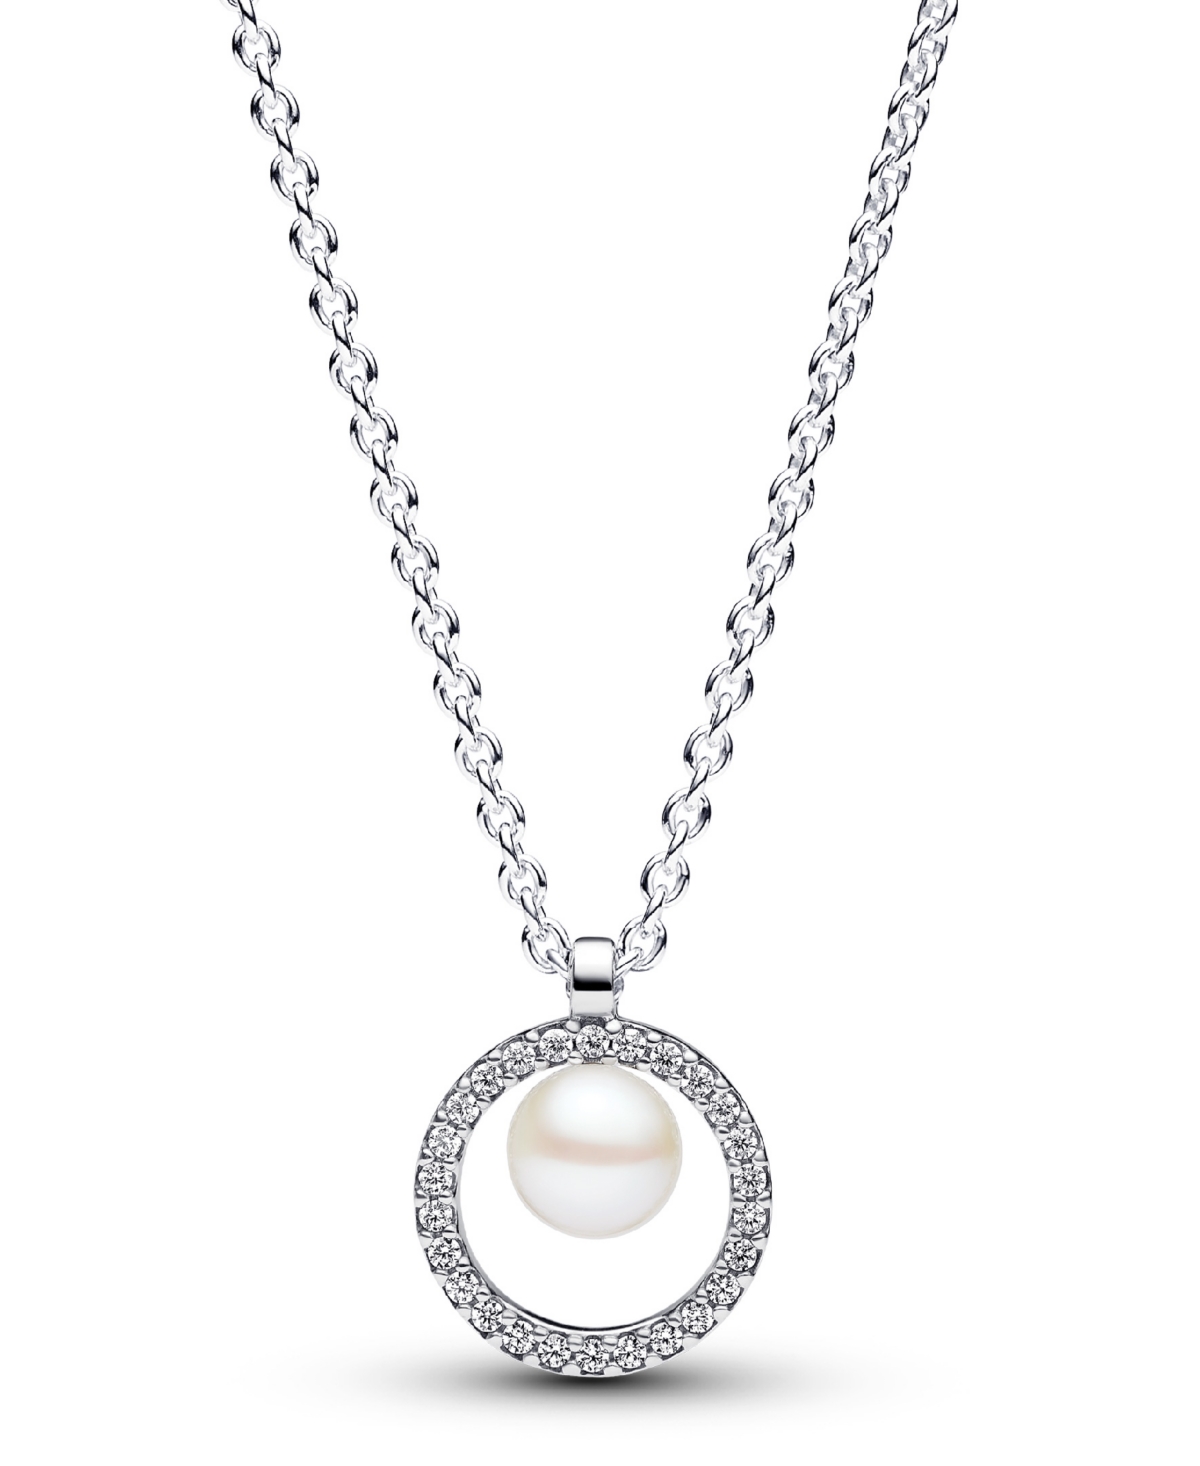 Sterling Silver Sparkling Treated Freshwater Cultured Pearl Pave Collier Necklace - Silver